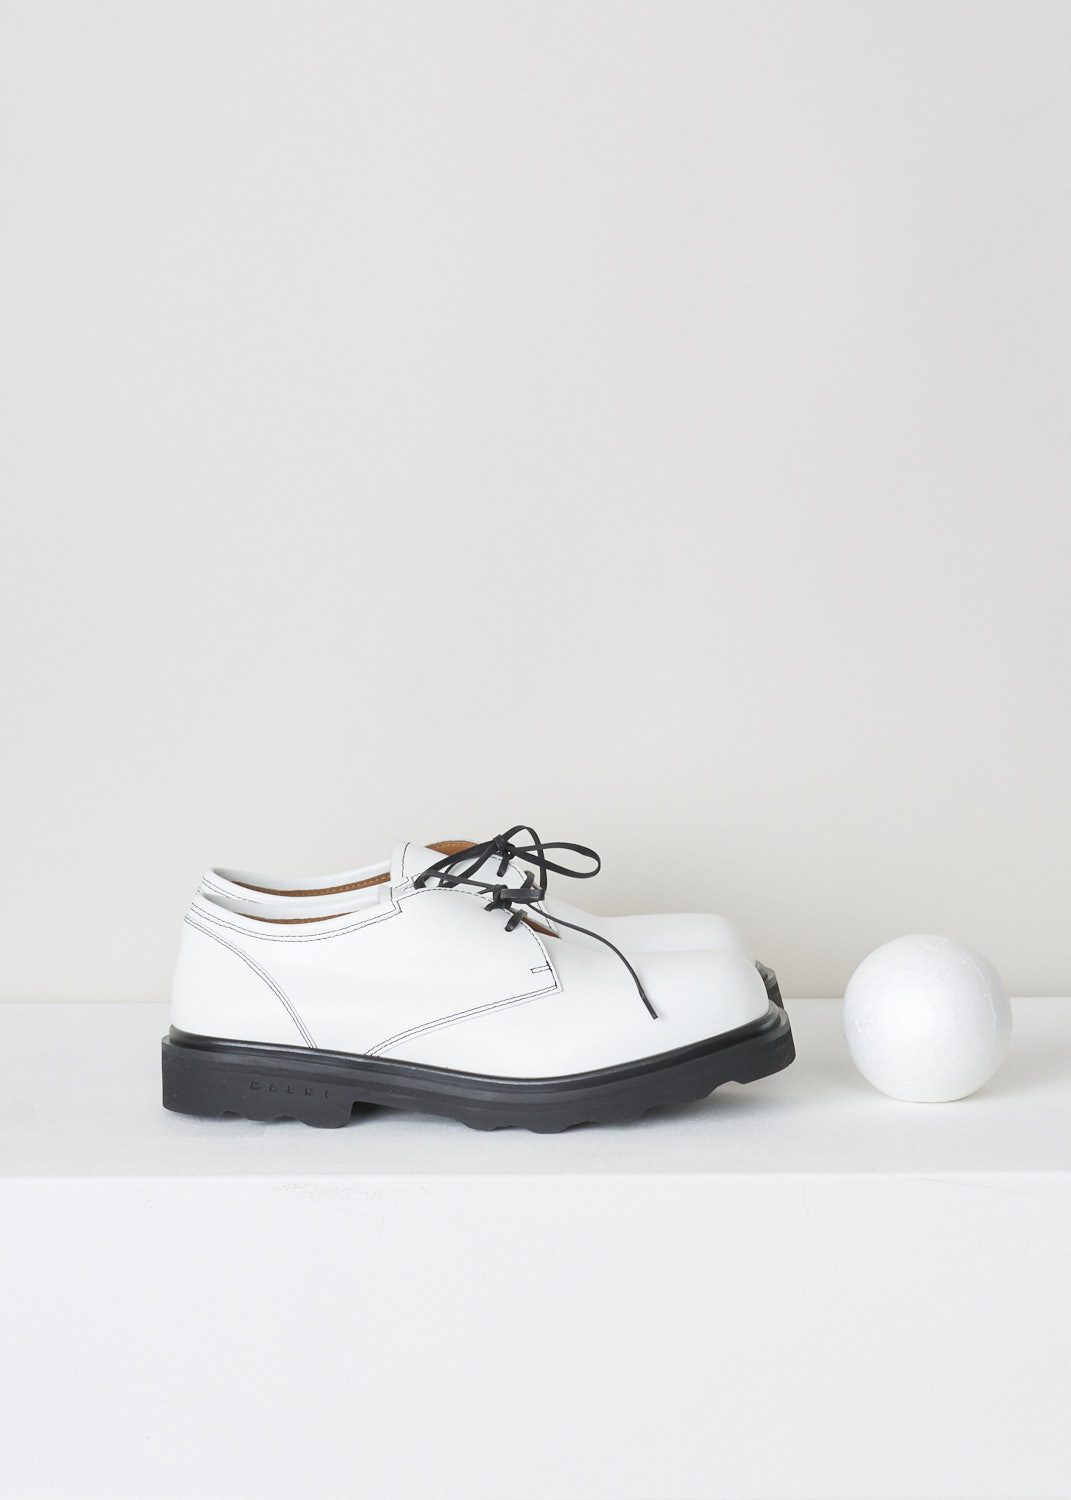 Marni, White derby shoes with chunky sole, ALMS004802_P4077_00W01, black white, side, White derby shoes, featuring black stitching, a chunky black sole and black leather lace.

Sole height: 3.5 cm / 1.3 inch. 